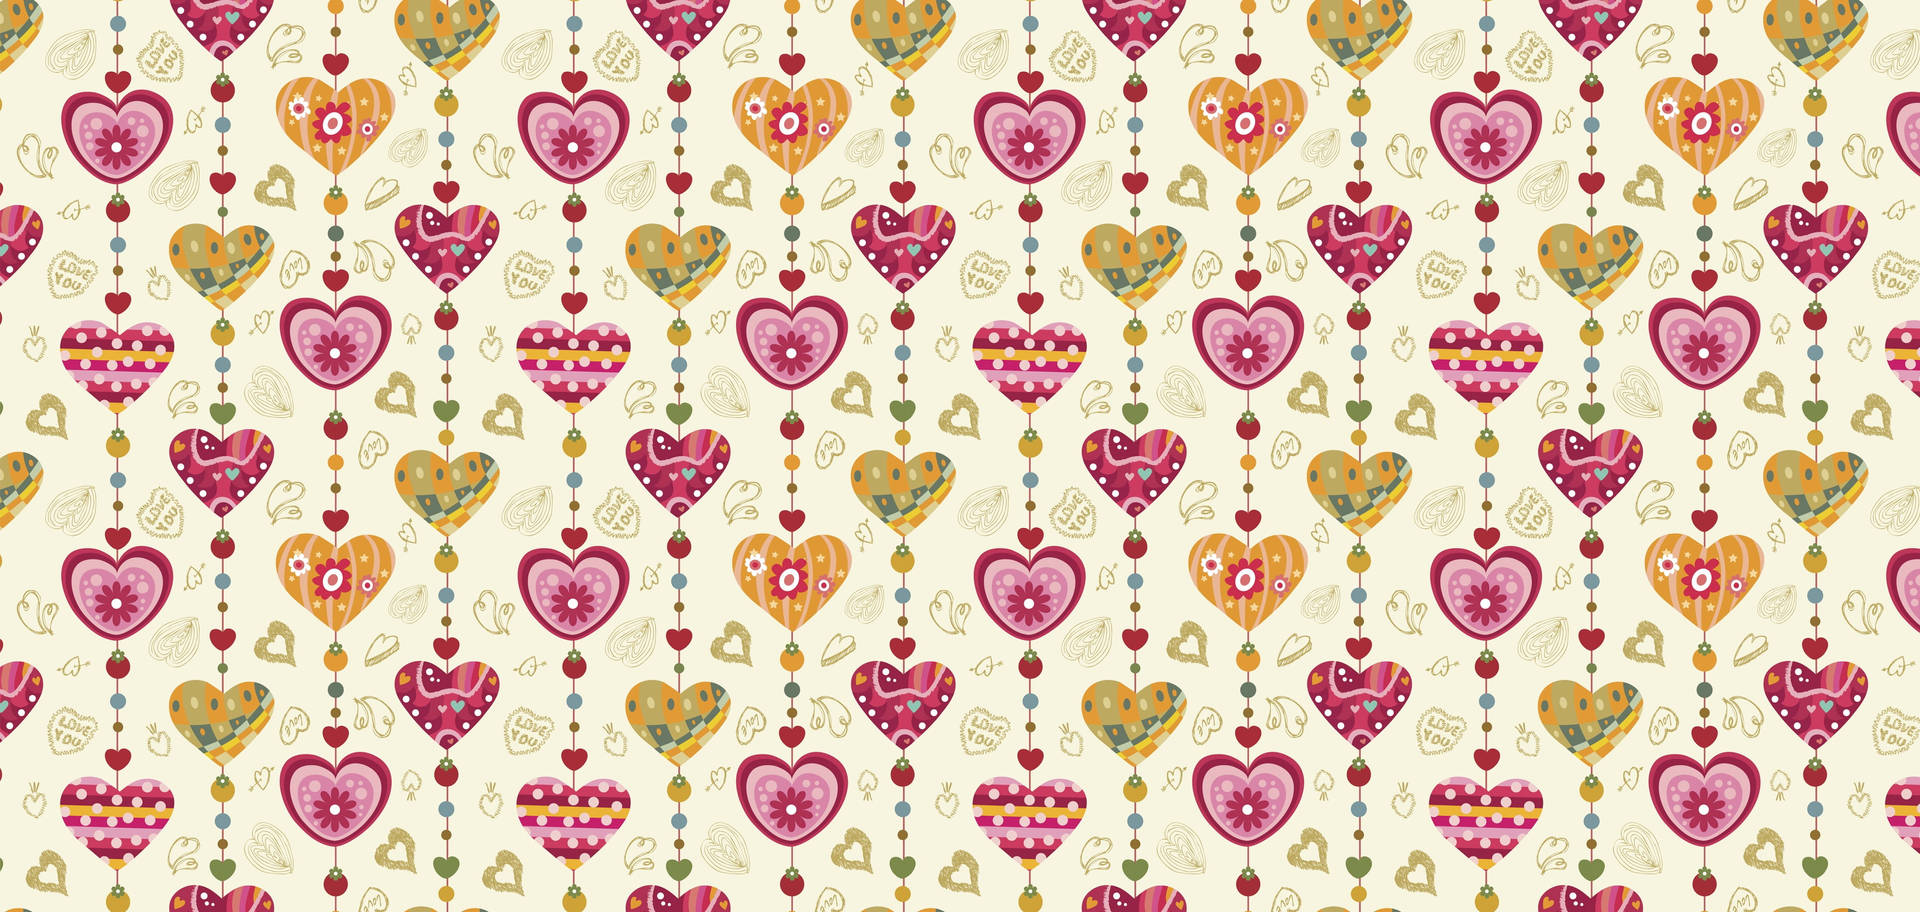 Awesome Heart Beads Background